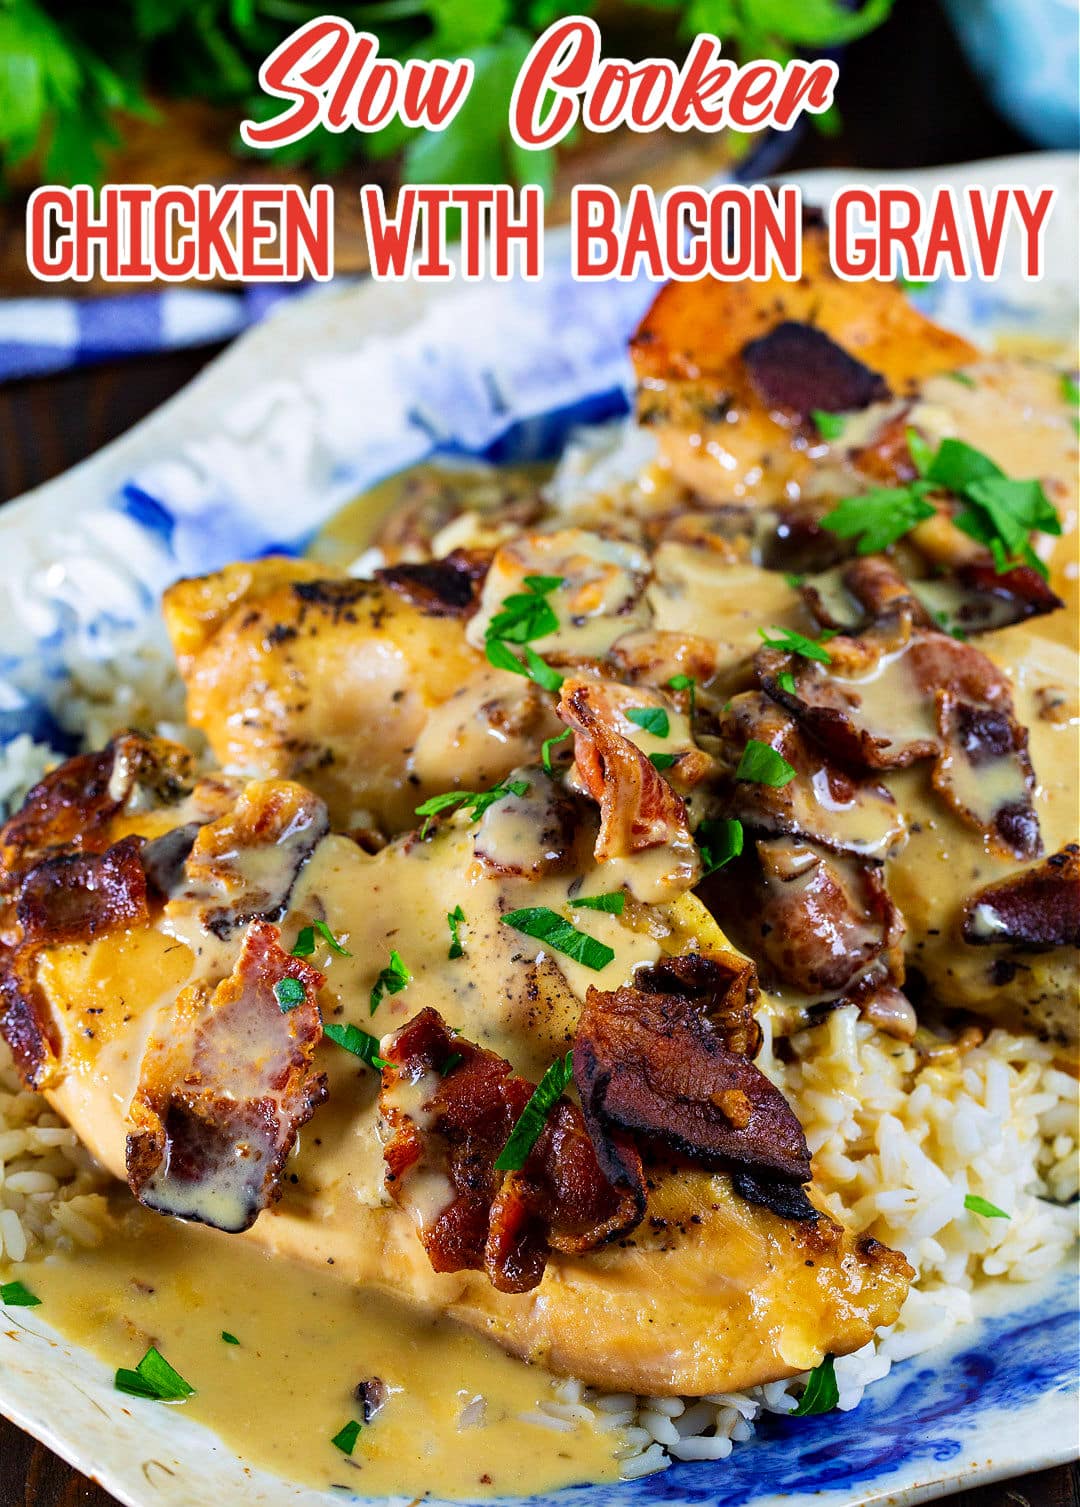 Slow Cooker Chicken with Bacon Gravy over white rice.